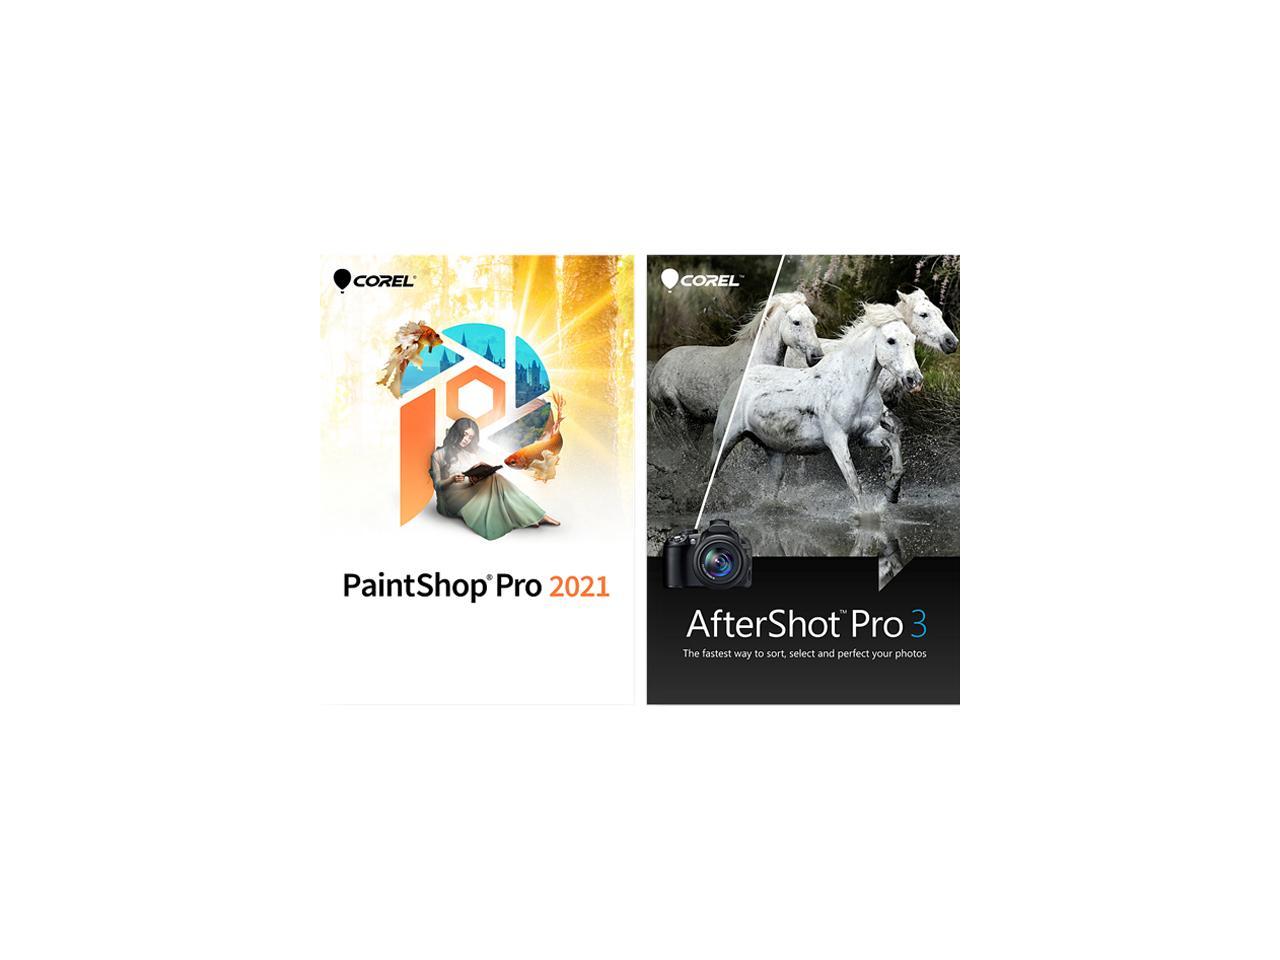 Corel PaintShop Pro 2021 with AfterShot Pro 3 - OEM - $12.75 (with free shipping) via Newegg